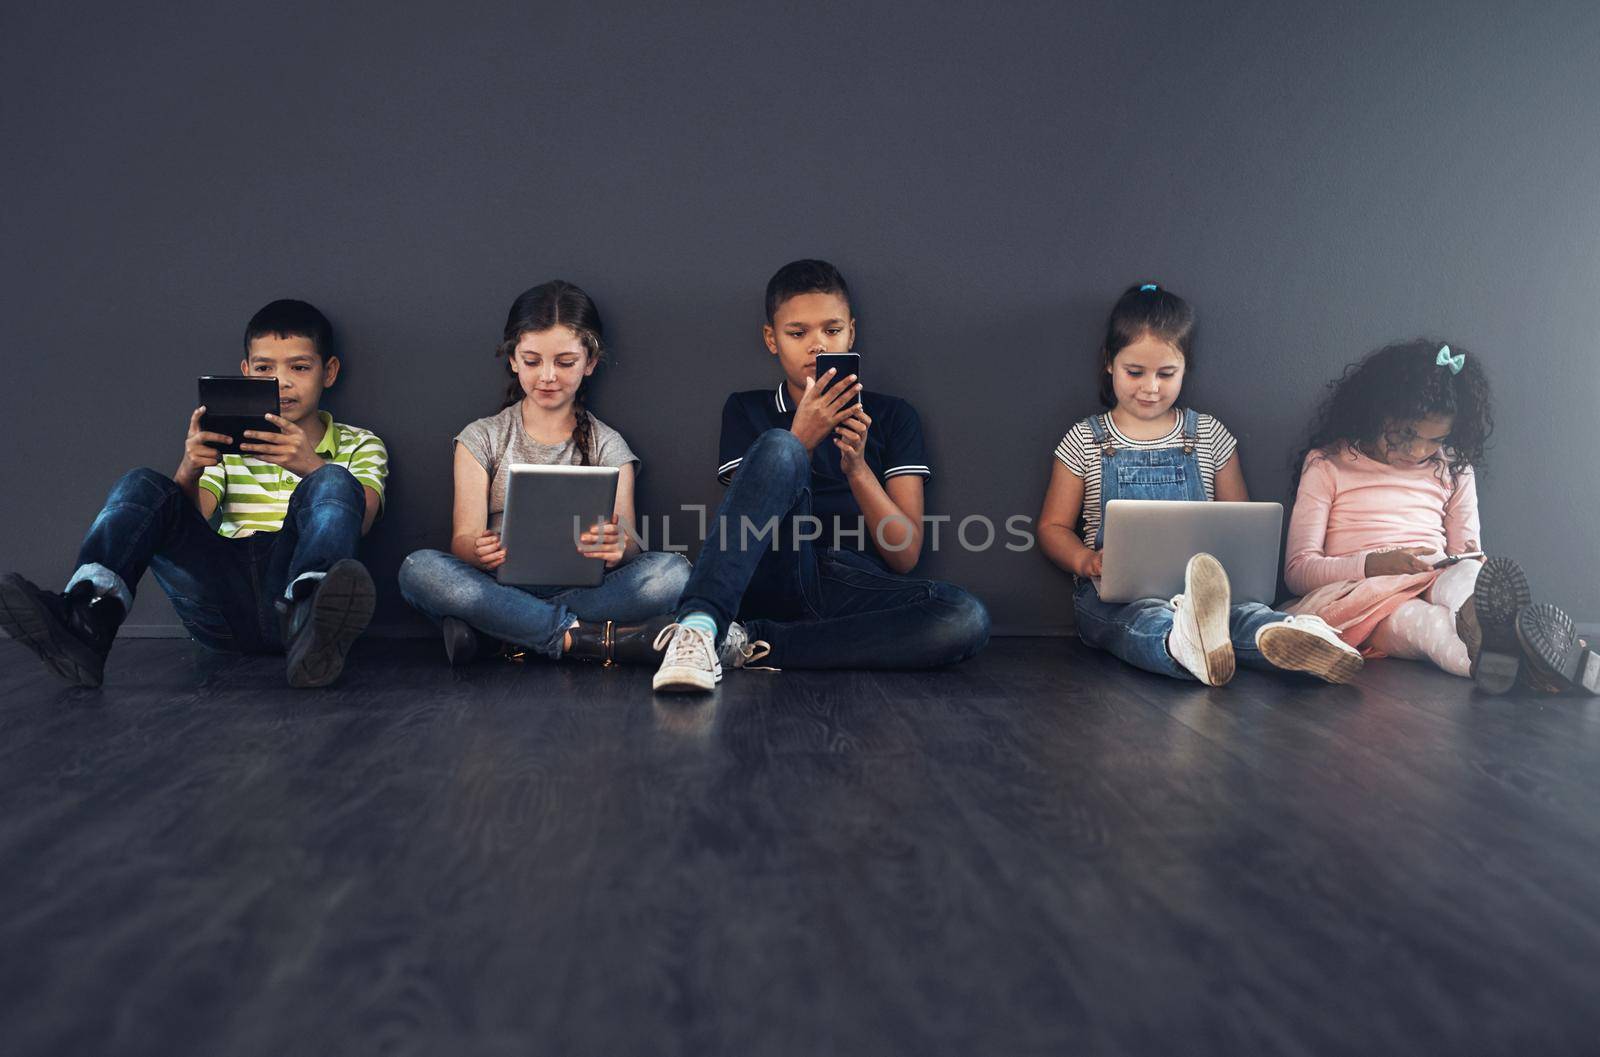 Learning to be technology literate. Studio shot of kids sitting on the floor and using wireless technology against a gray background